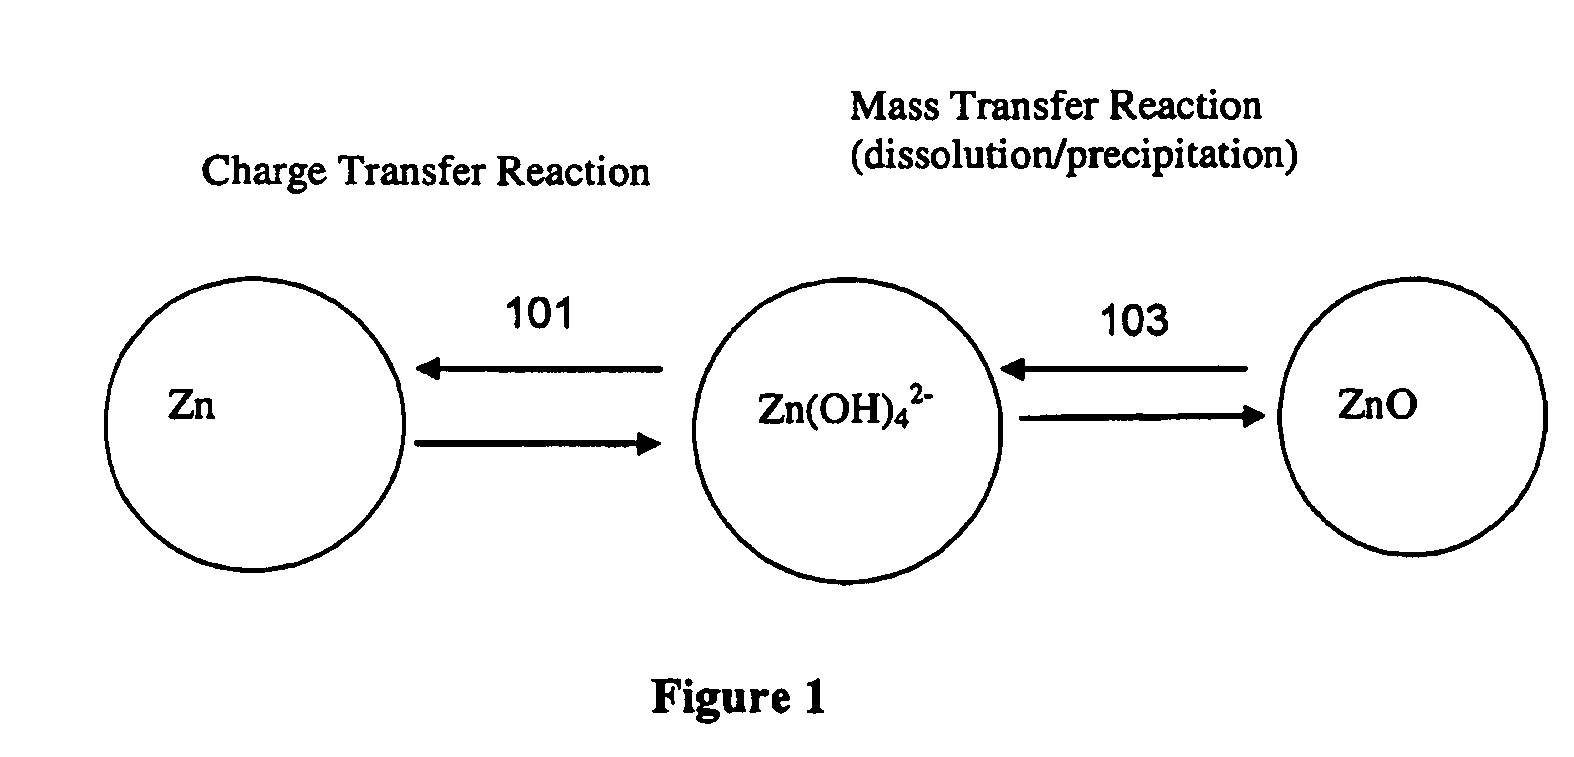 Pasted nickel hydroxide electrode for rechargeable nickel-zinc batteries